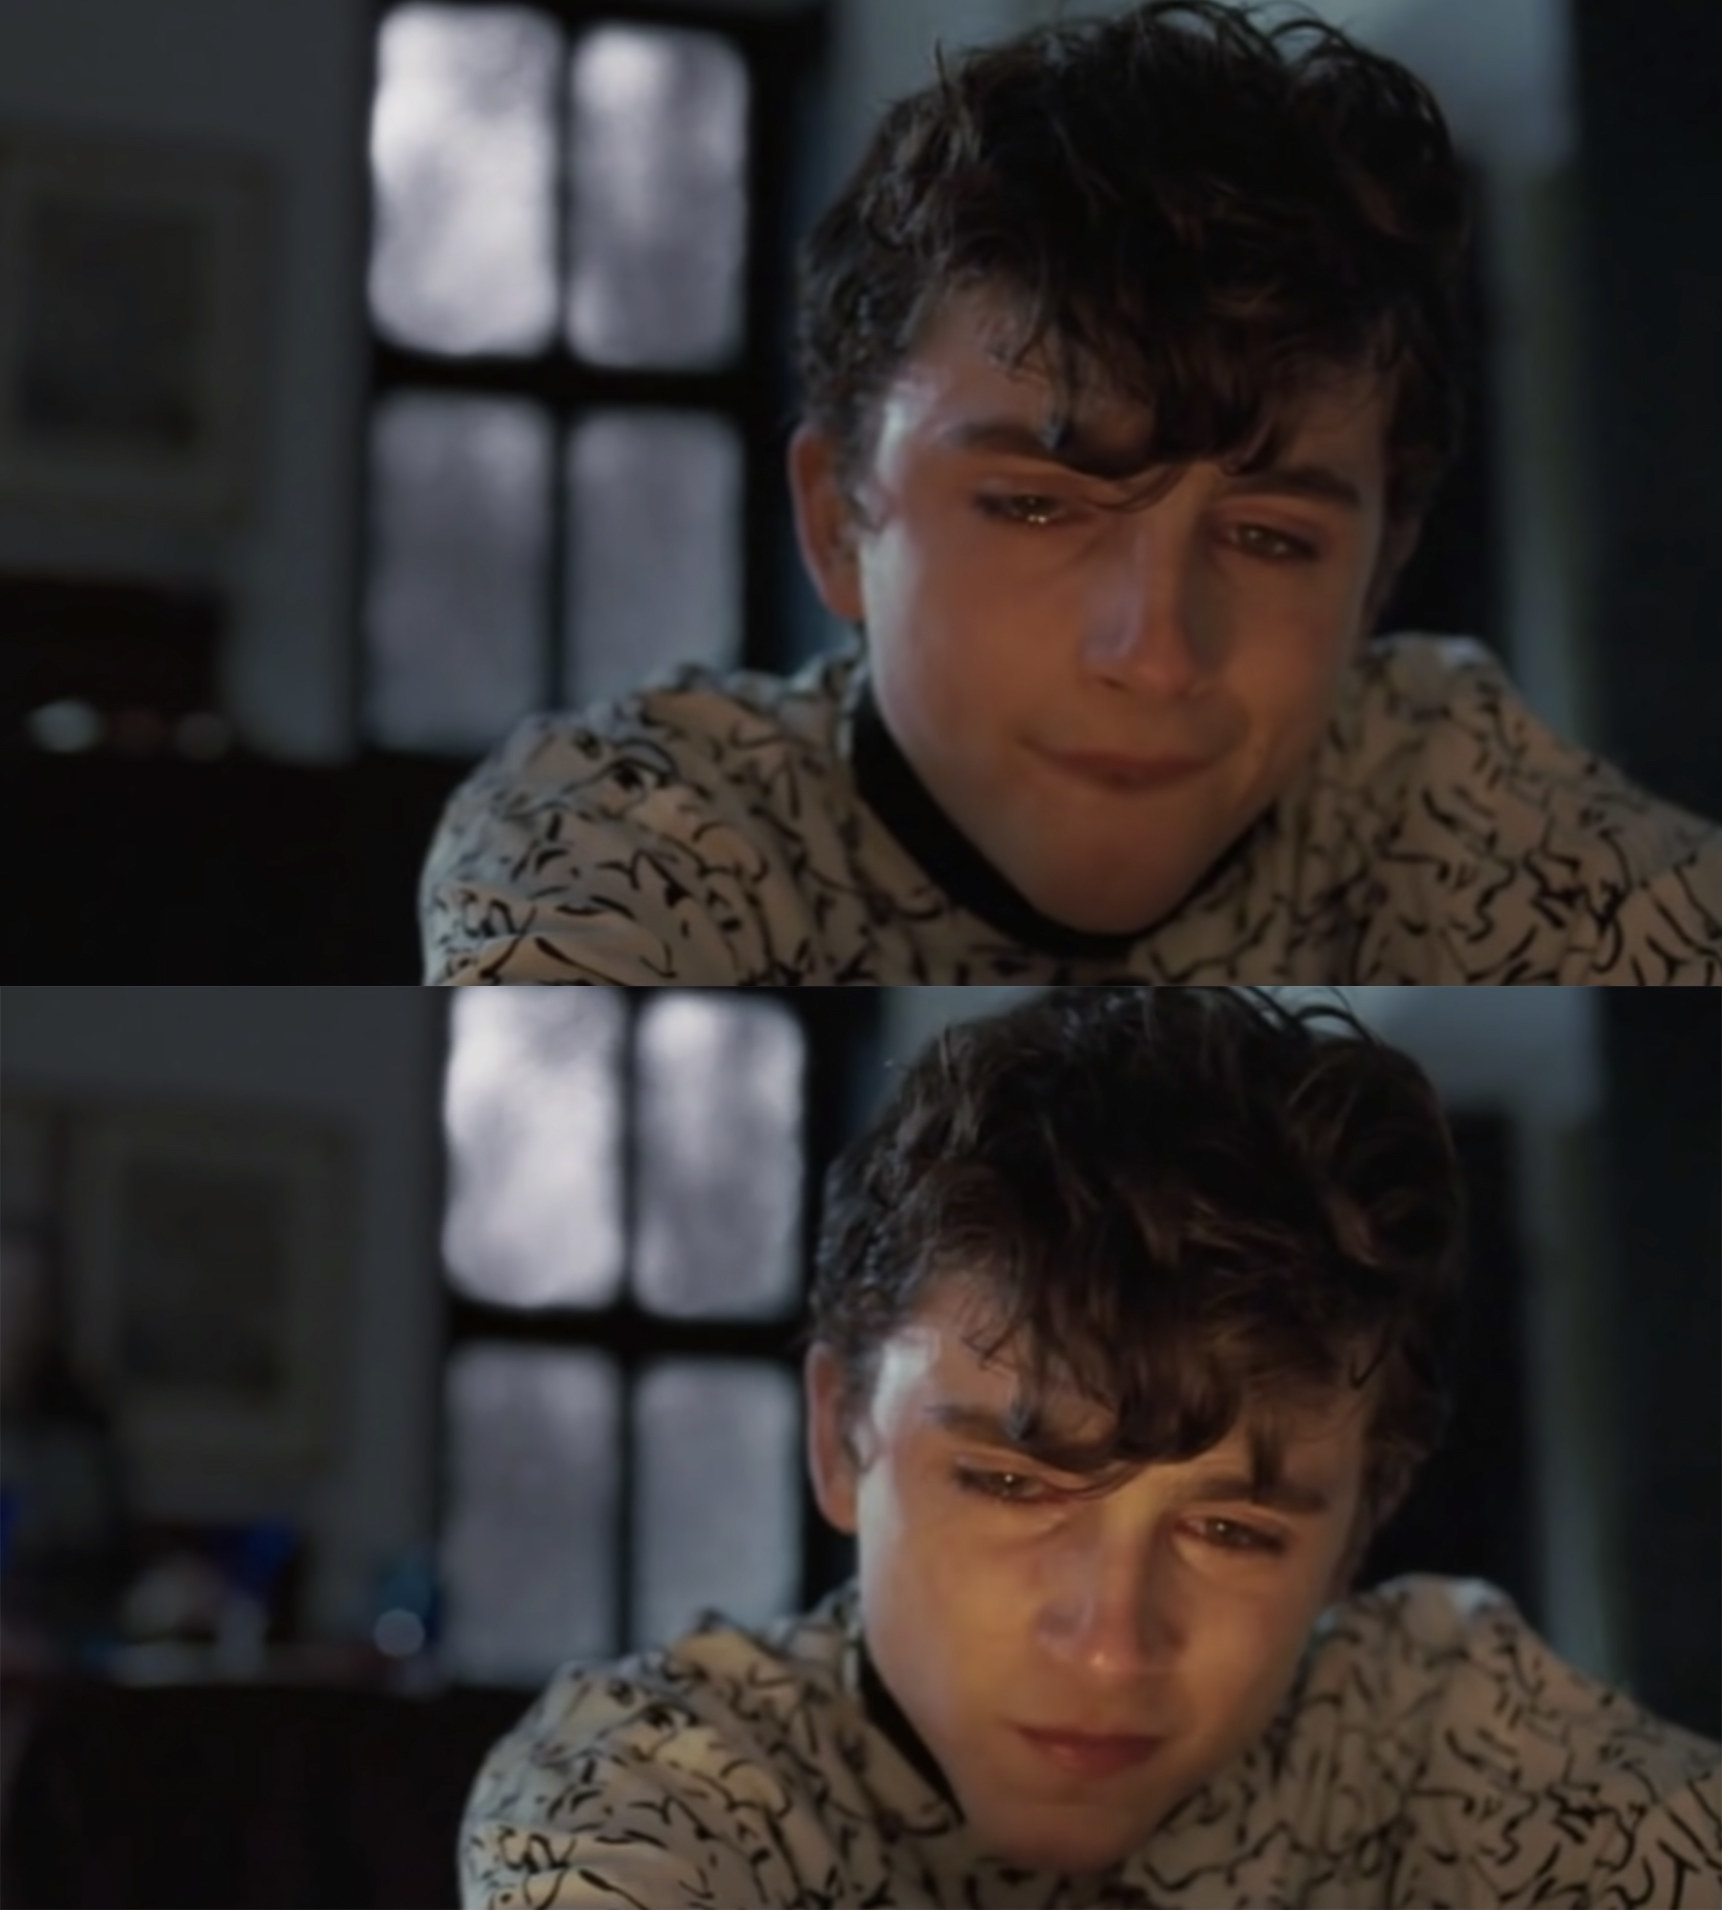 Elio sitting in front of a fireplace and silently crying. 